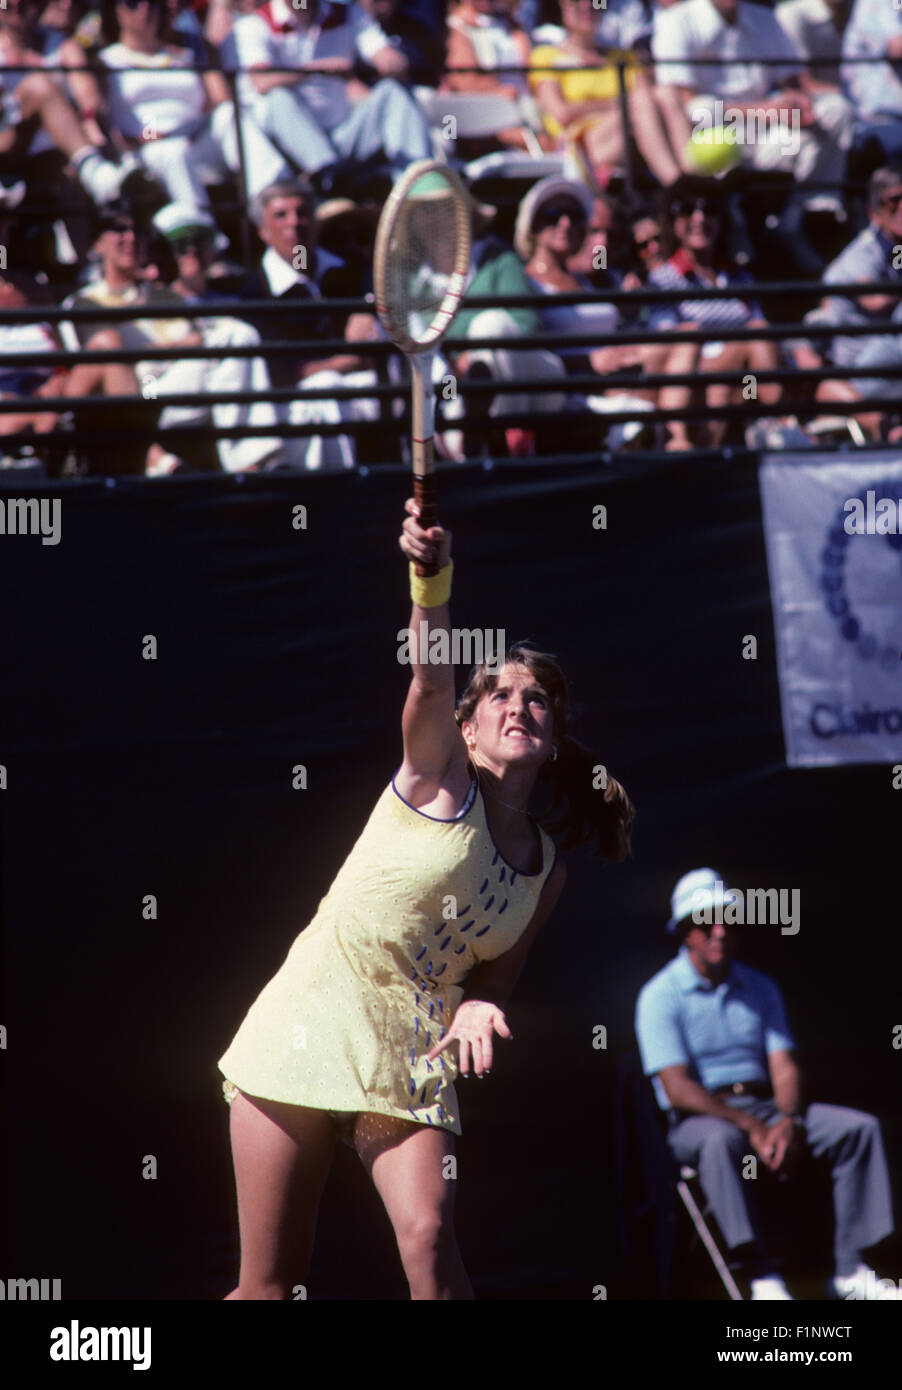 Tracy Austin in action at the Clairol Crown tennis tournament at La Costa Resort in Carlsbad, California in April 1980. Stock Photo